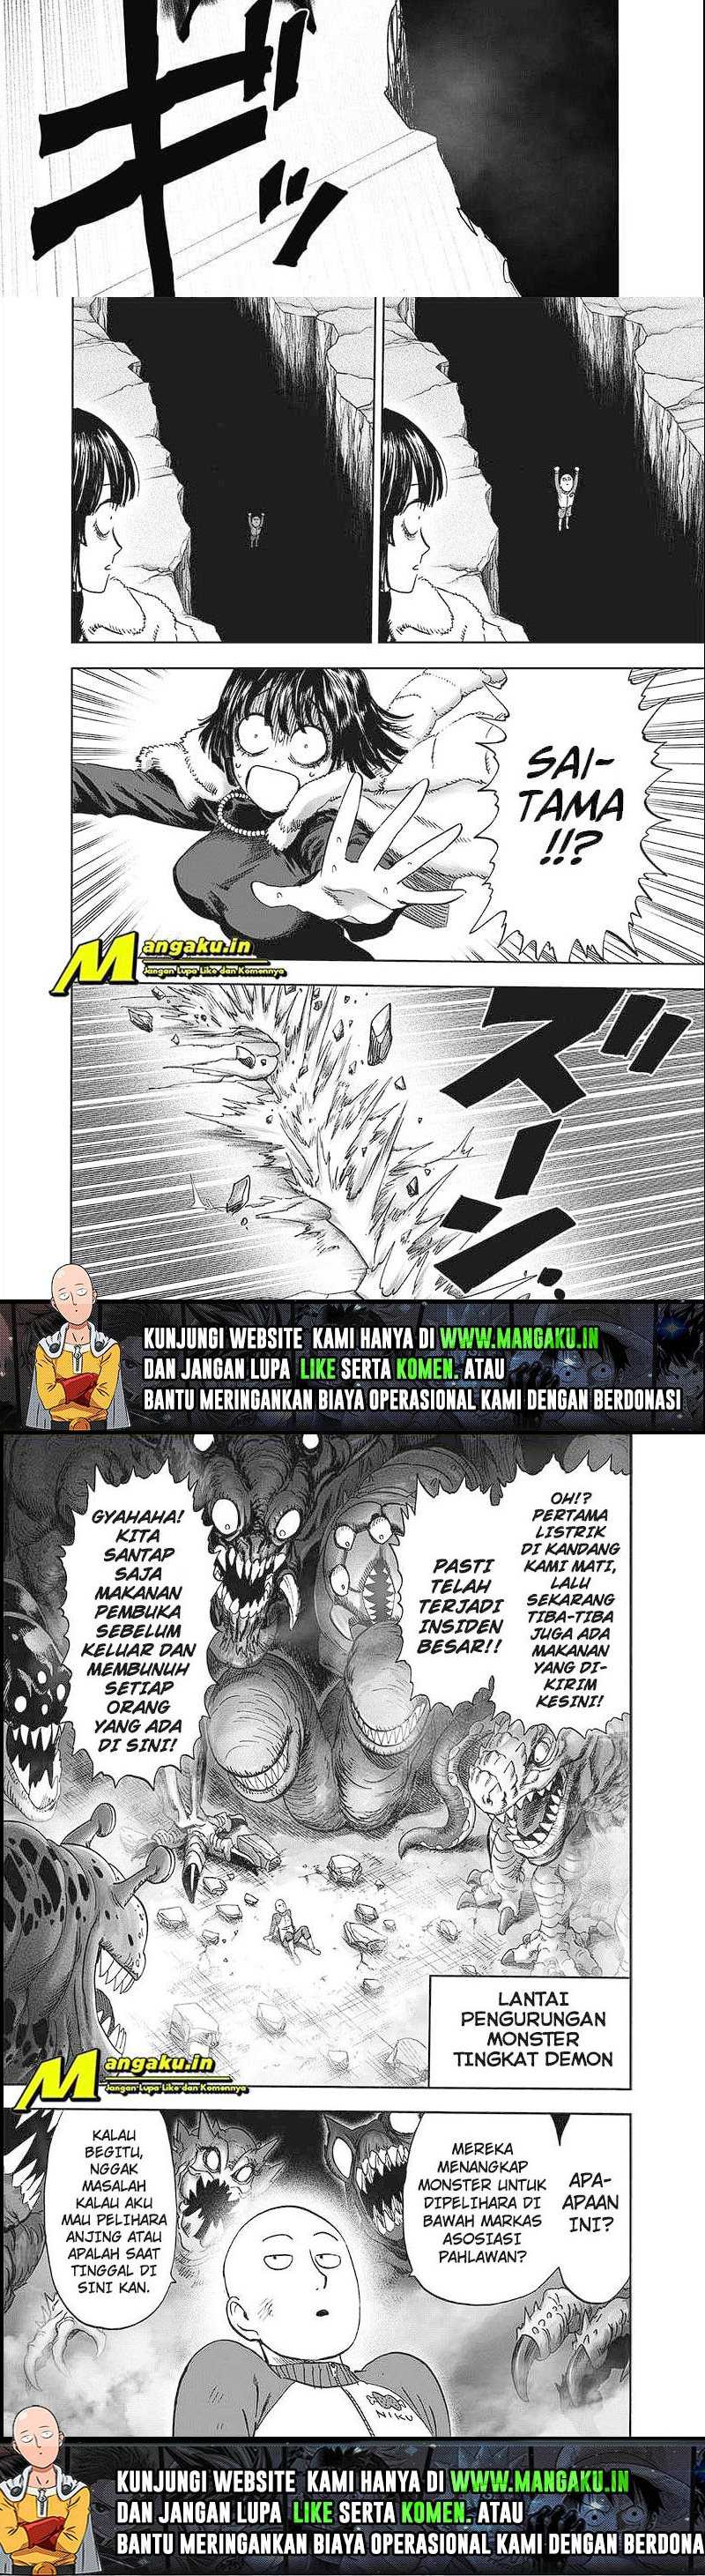 One Punch Man Chapter 230 9